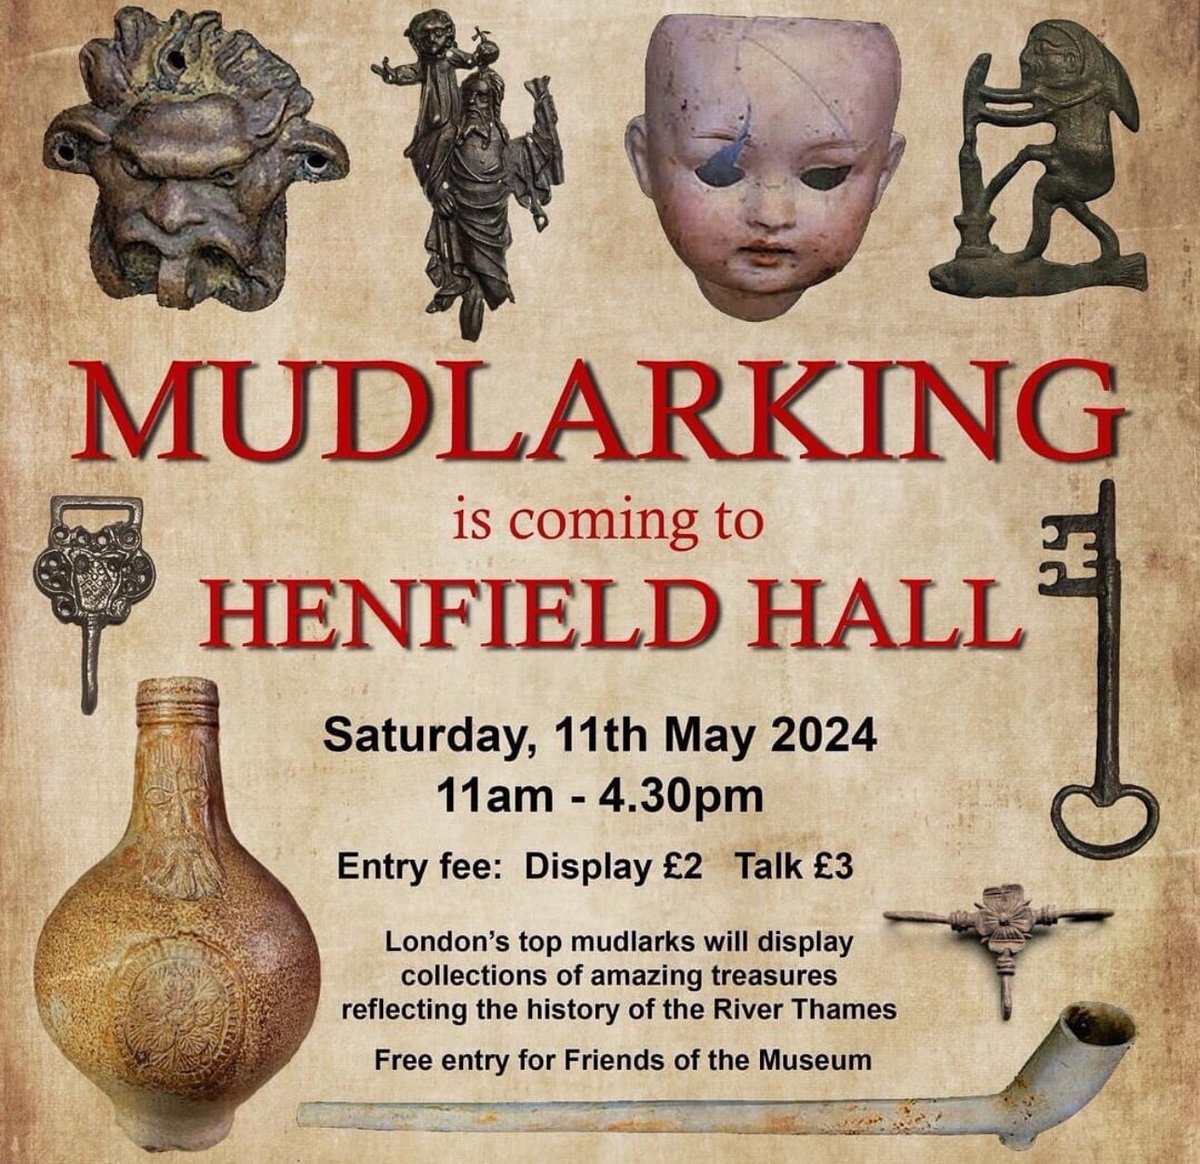 If you're in Sussex do come along in May 11th when there will be an invasion of #London #Mudlarks - including me - showing our #finds!